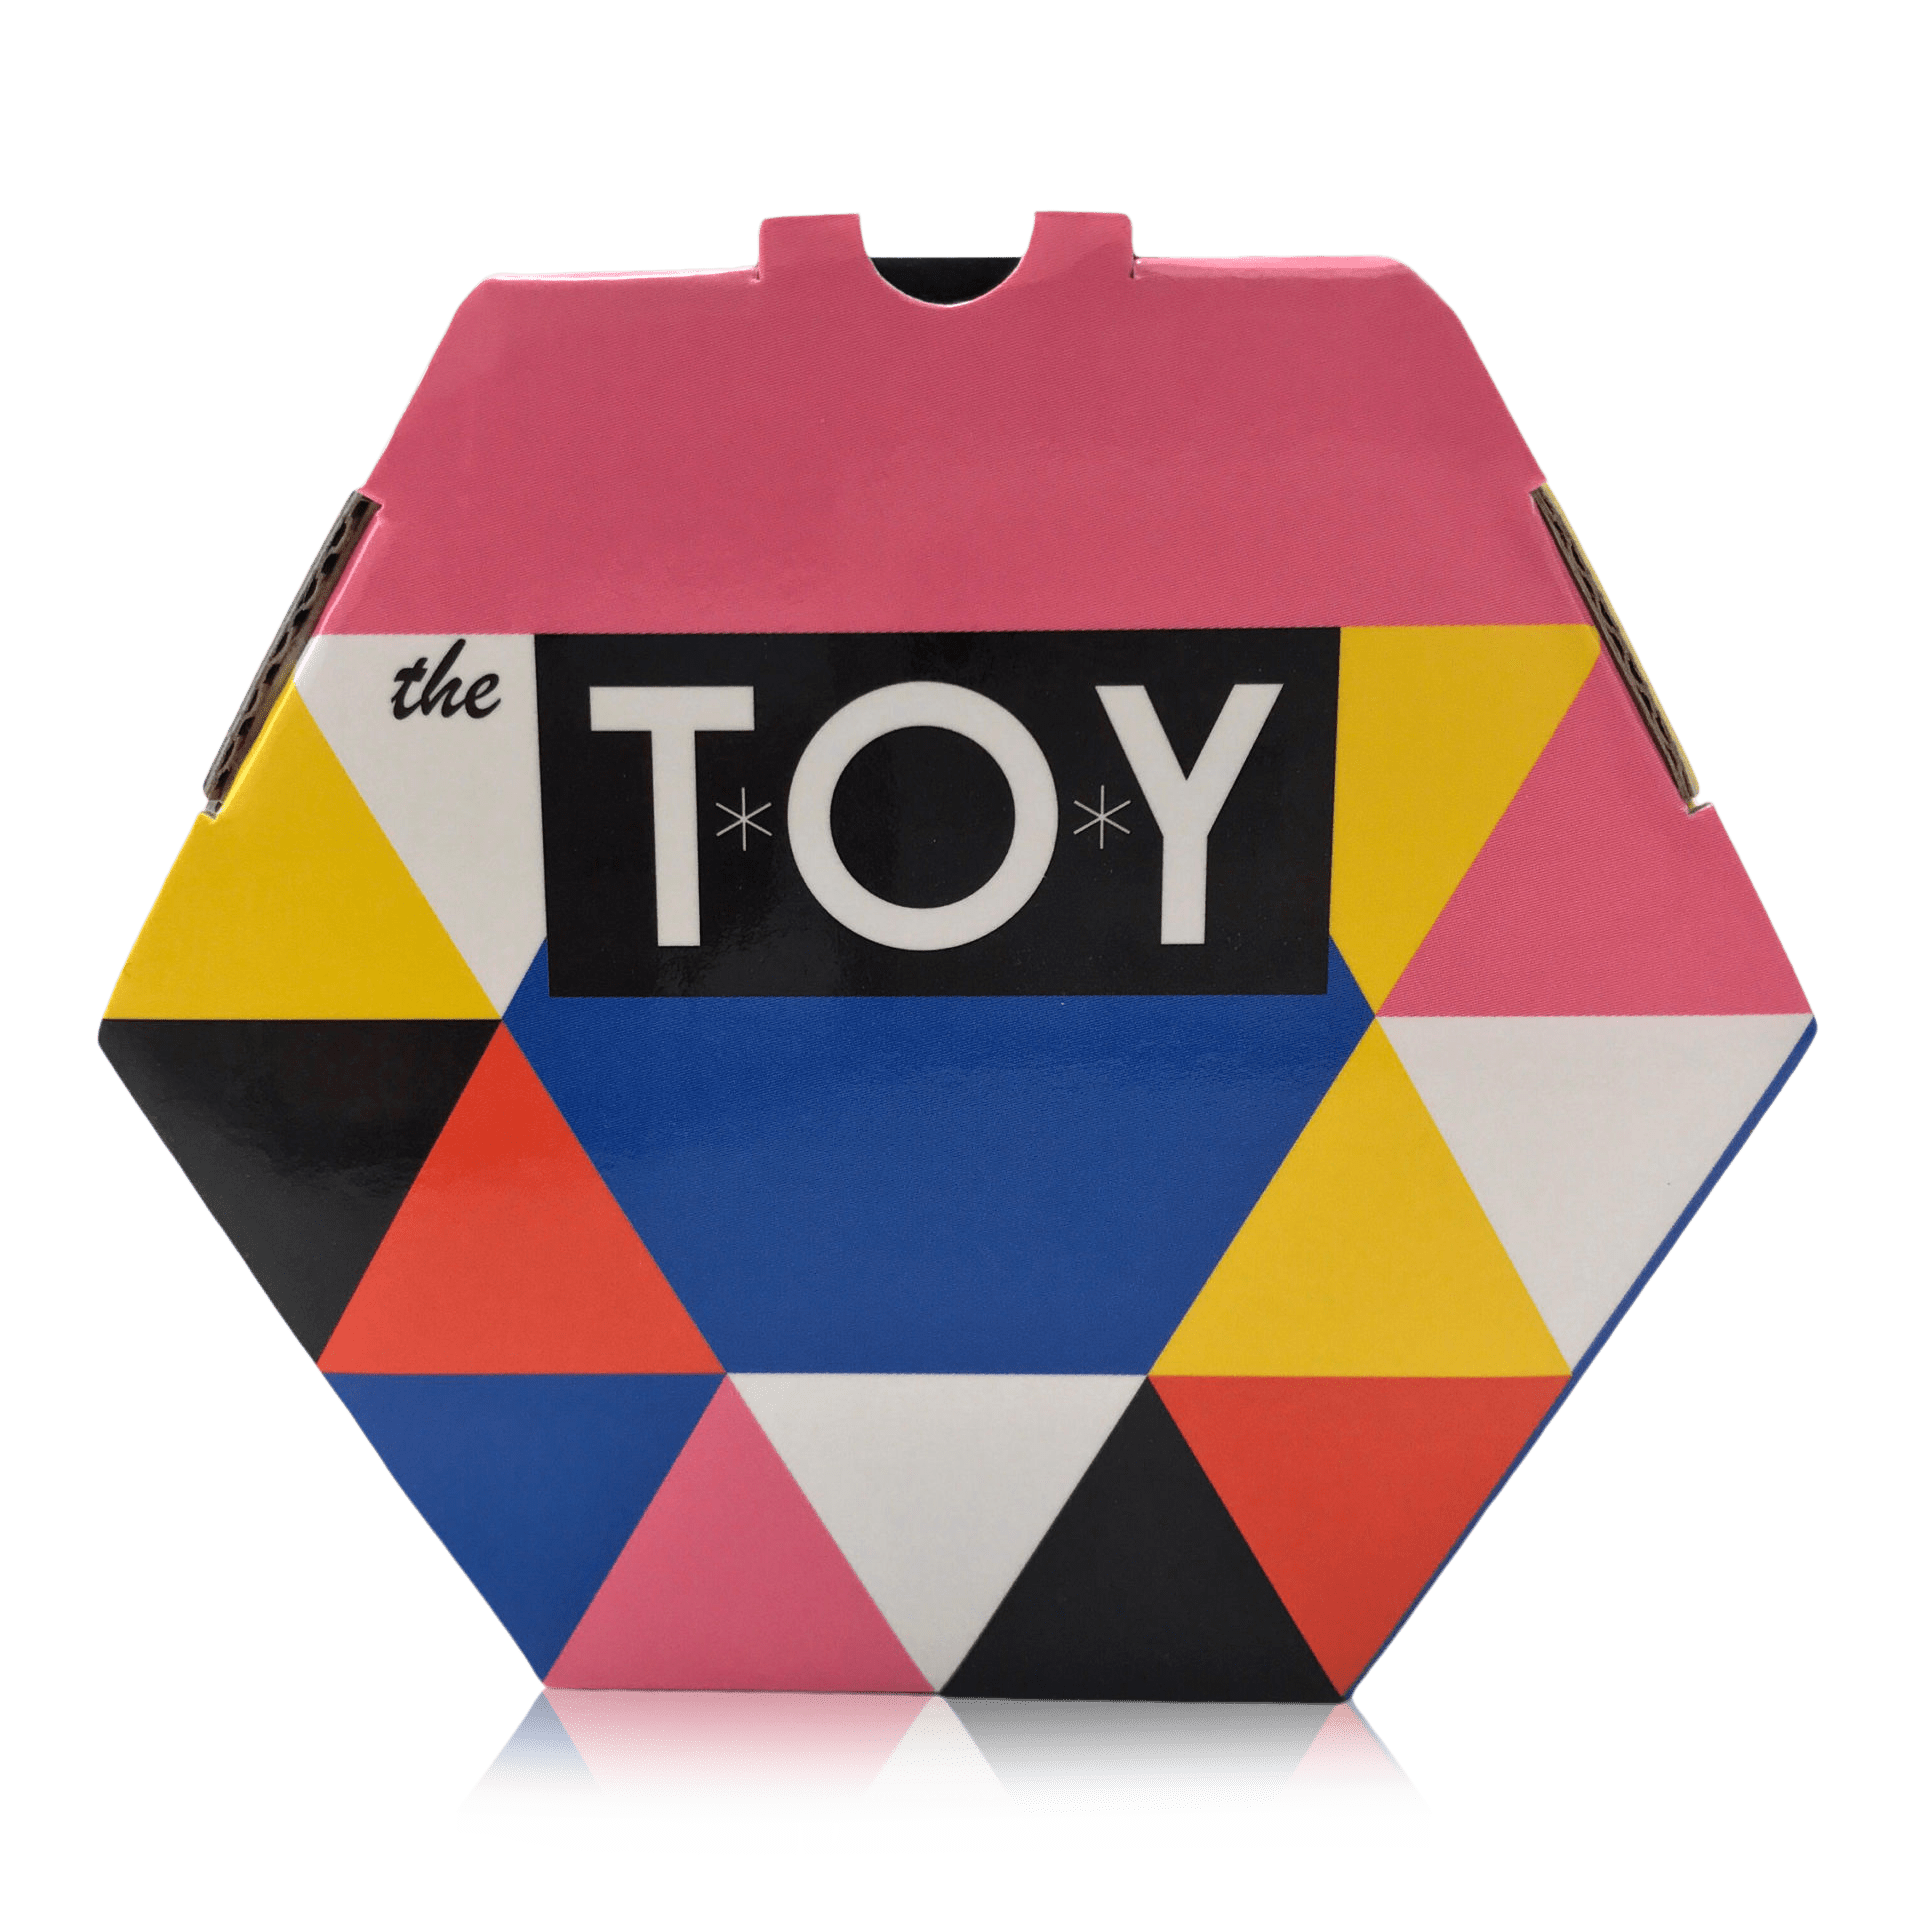 The Eames Toy